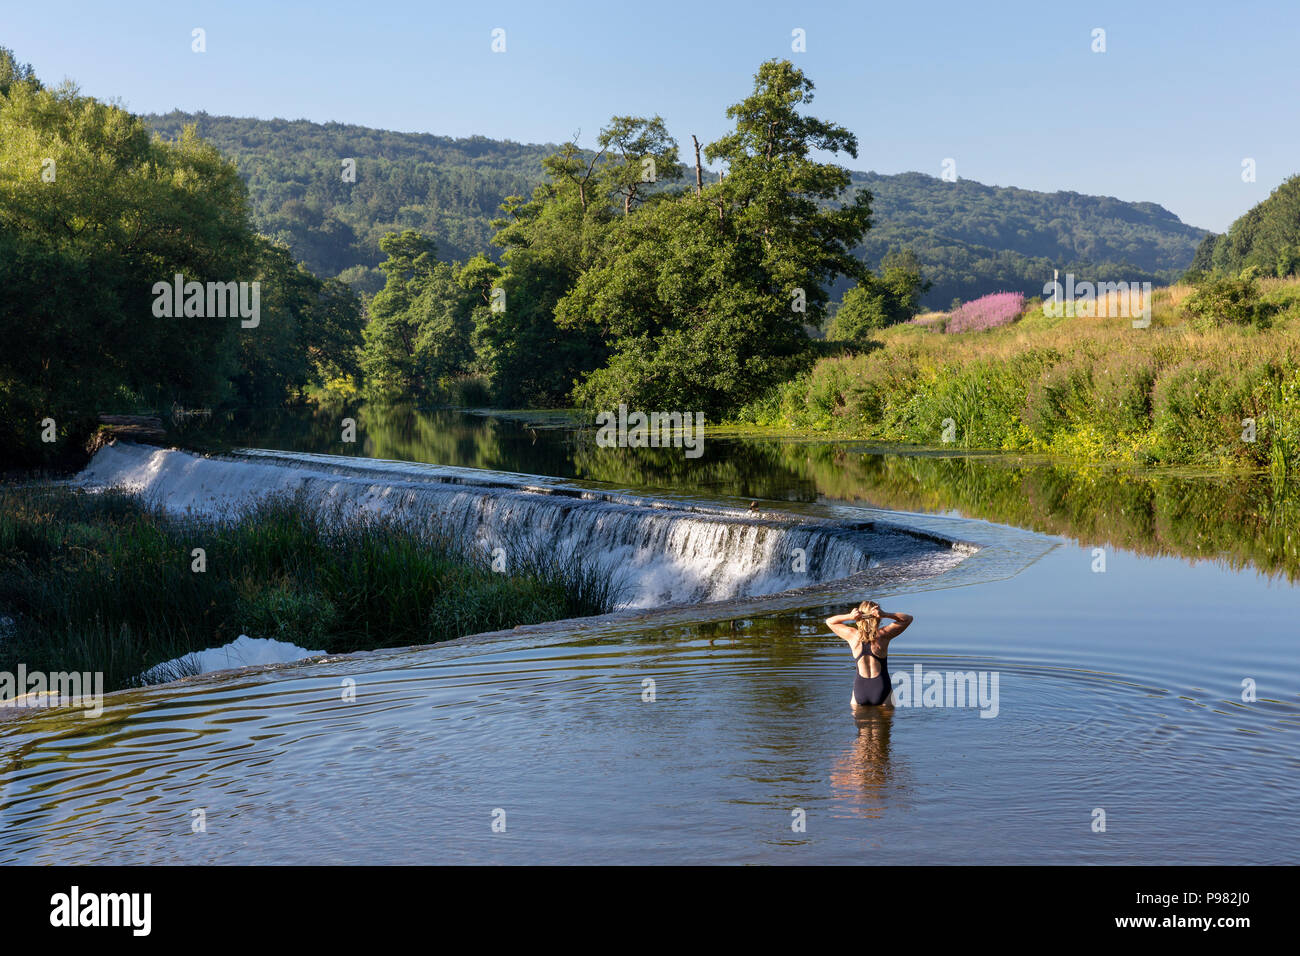 A swimmer standing in the shallows preparing to swim in the River Avon at Warleigh Weir in Somerset, England Stock Photo